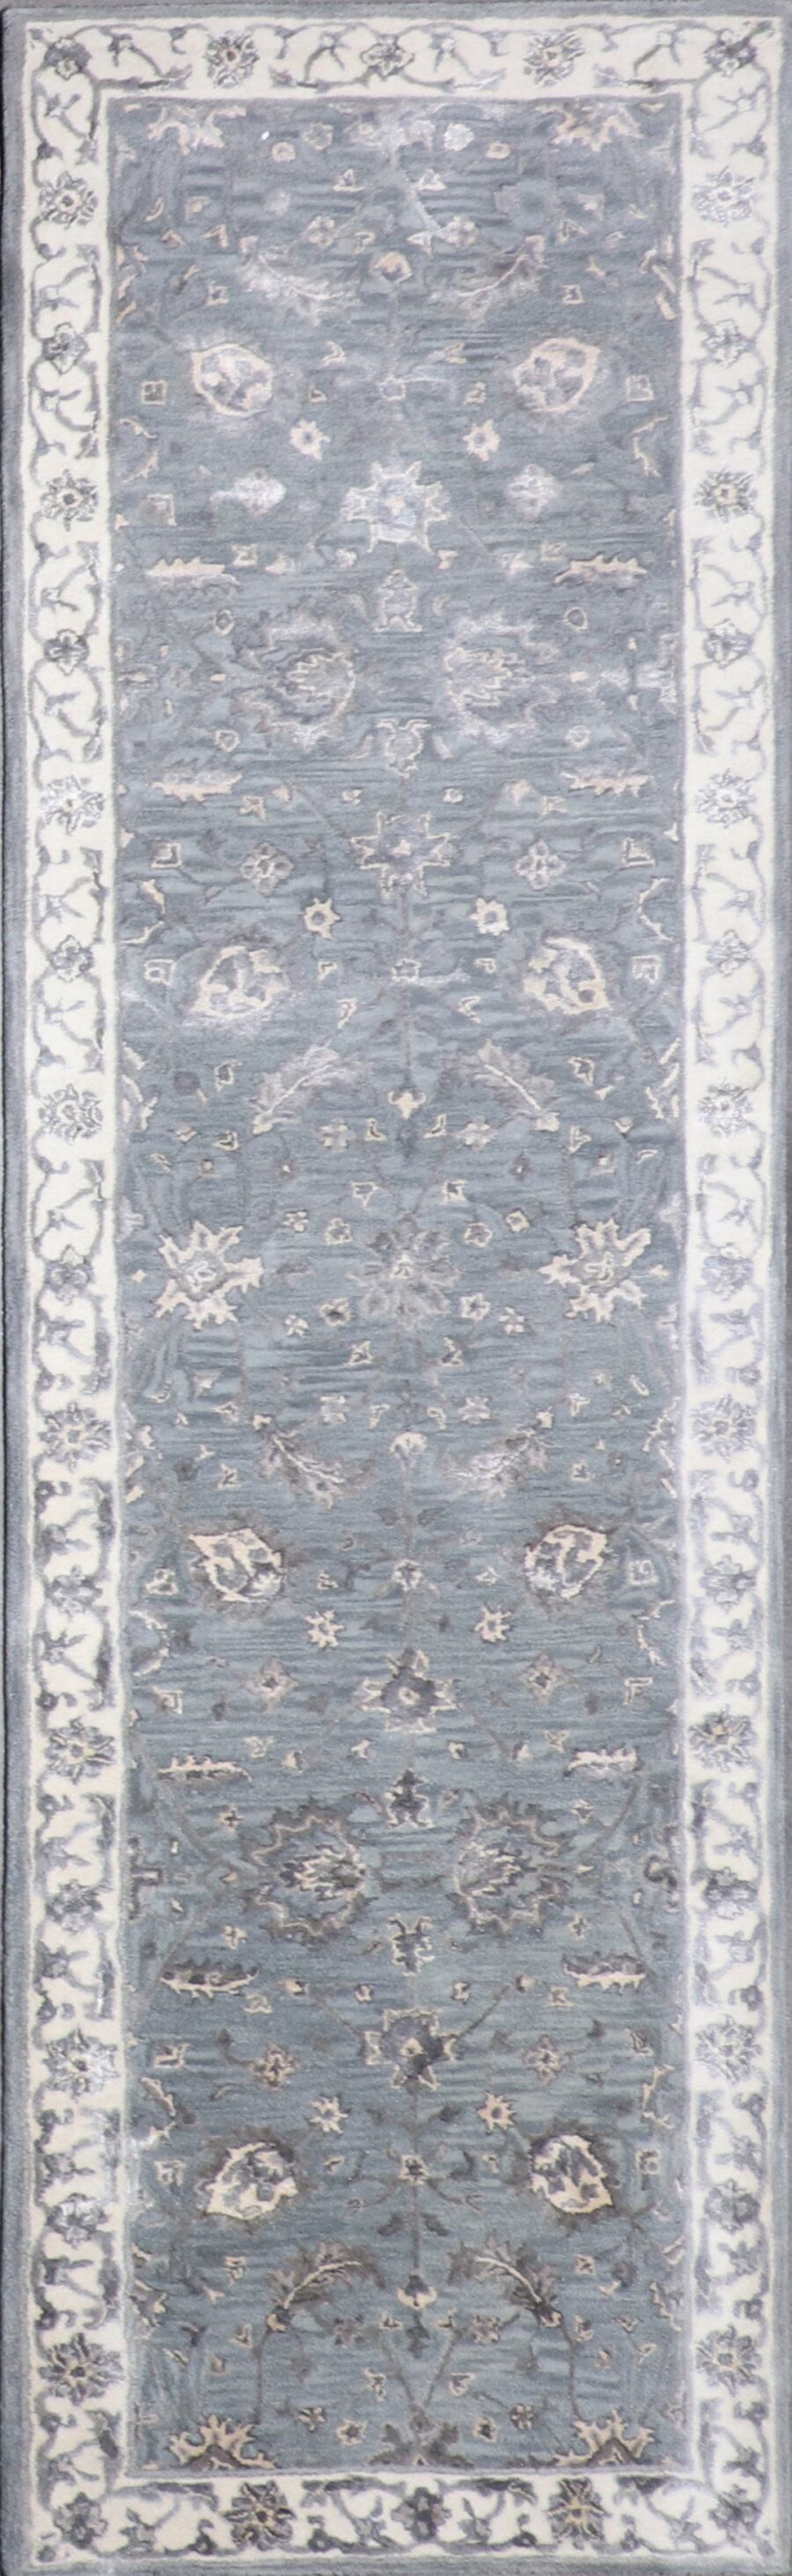 2'10"x10' Decorative Vintage Gray Wool & Silk Rug - Direct Rug Import | Rugs in Chicago, Indiana,South Bend,Granger